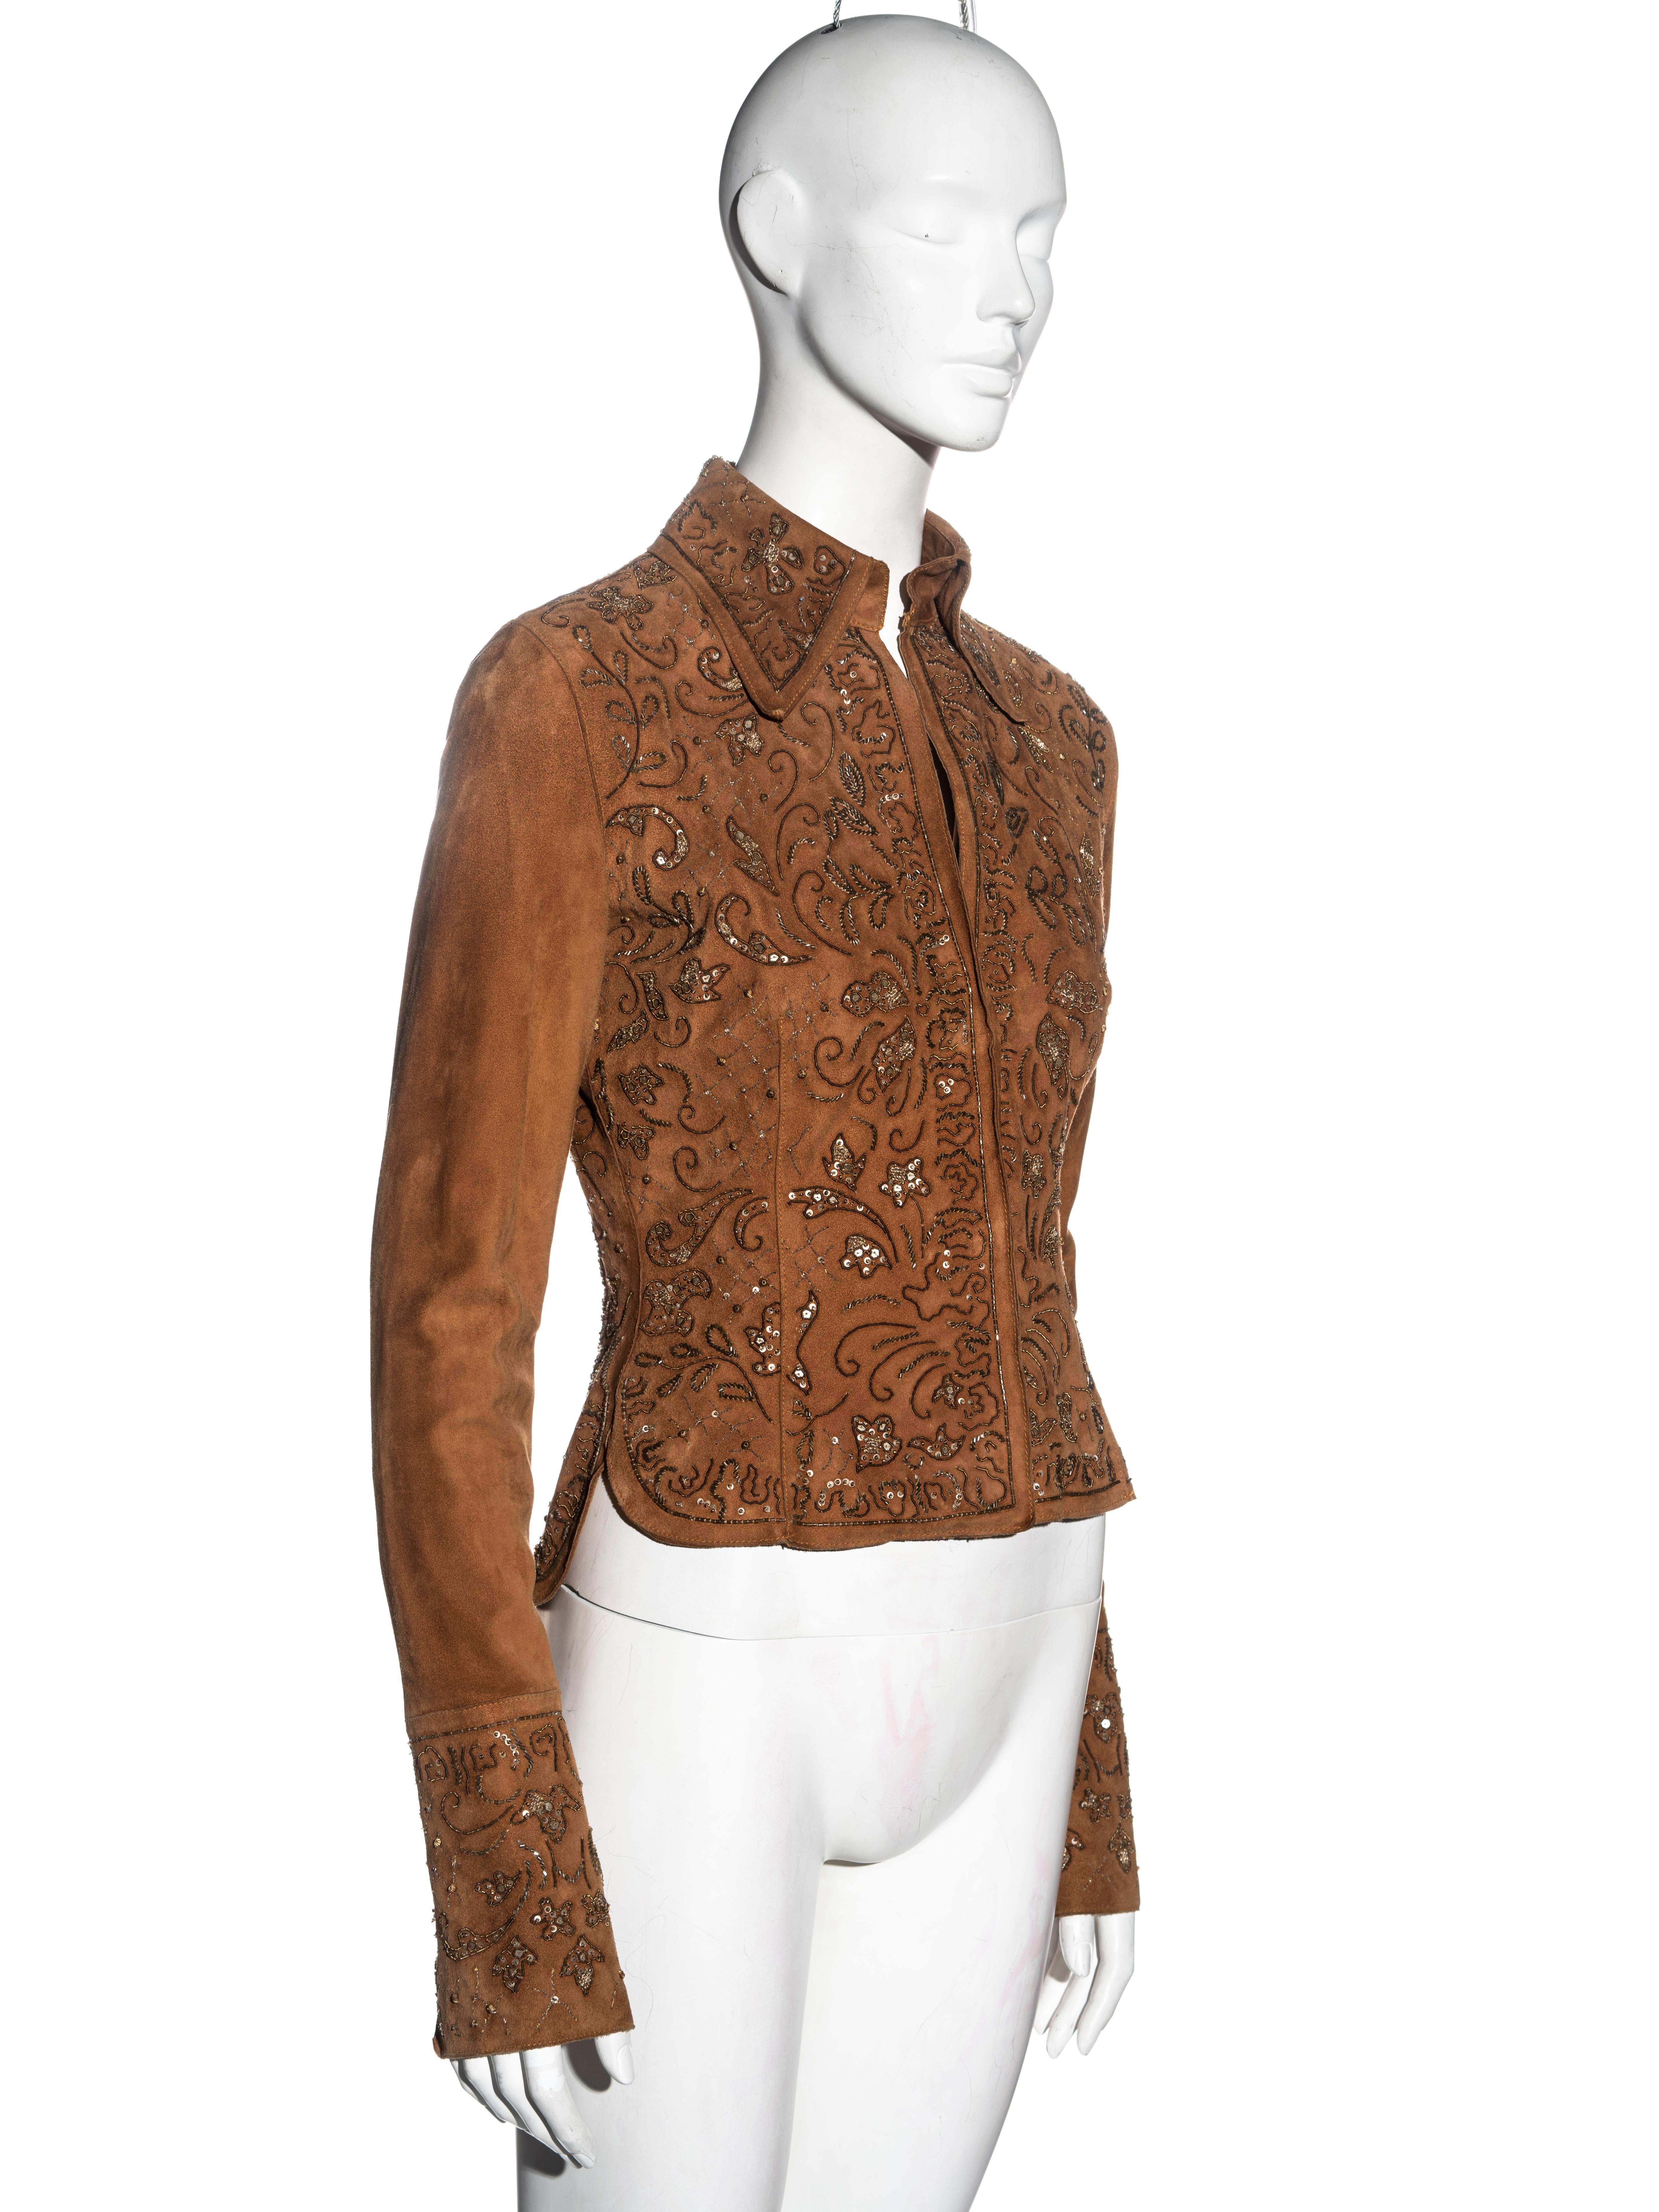 Dolce & Gabbana brown goat suede embellished shirt, ss 2001 In Excellent Condition For Sale In London, GB